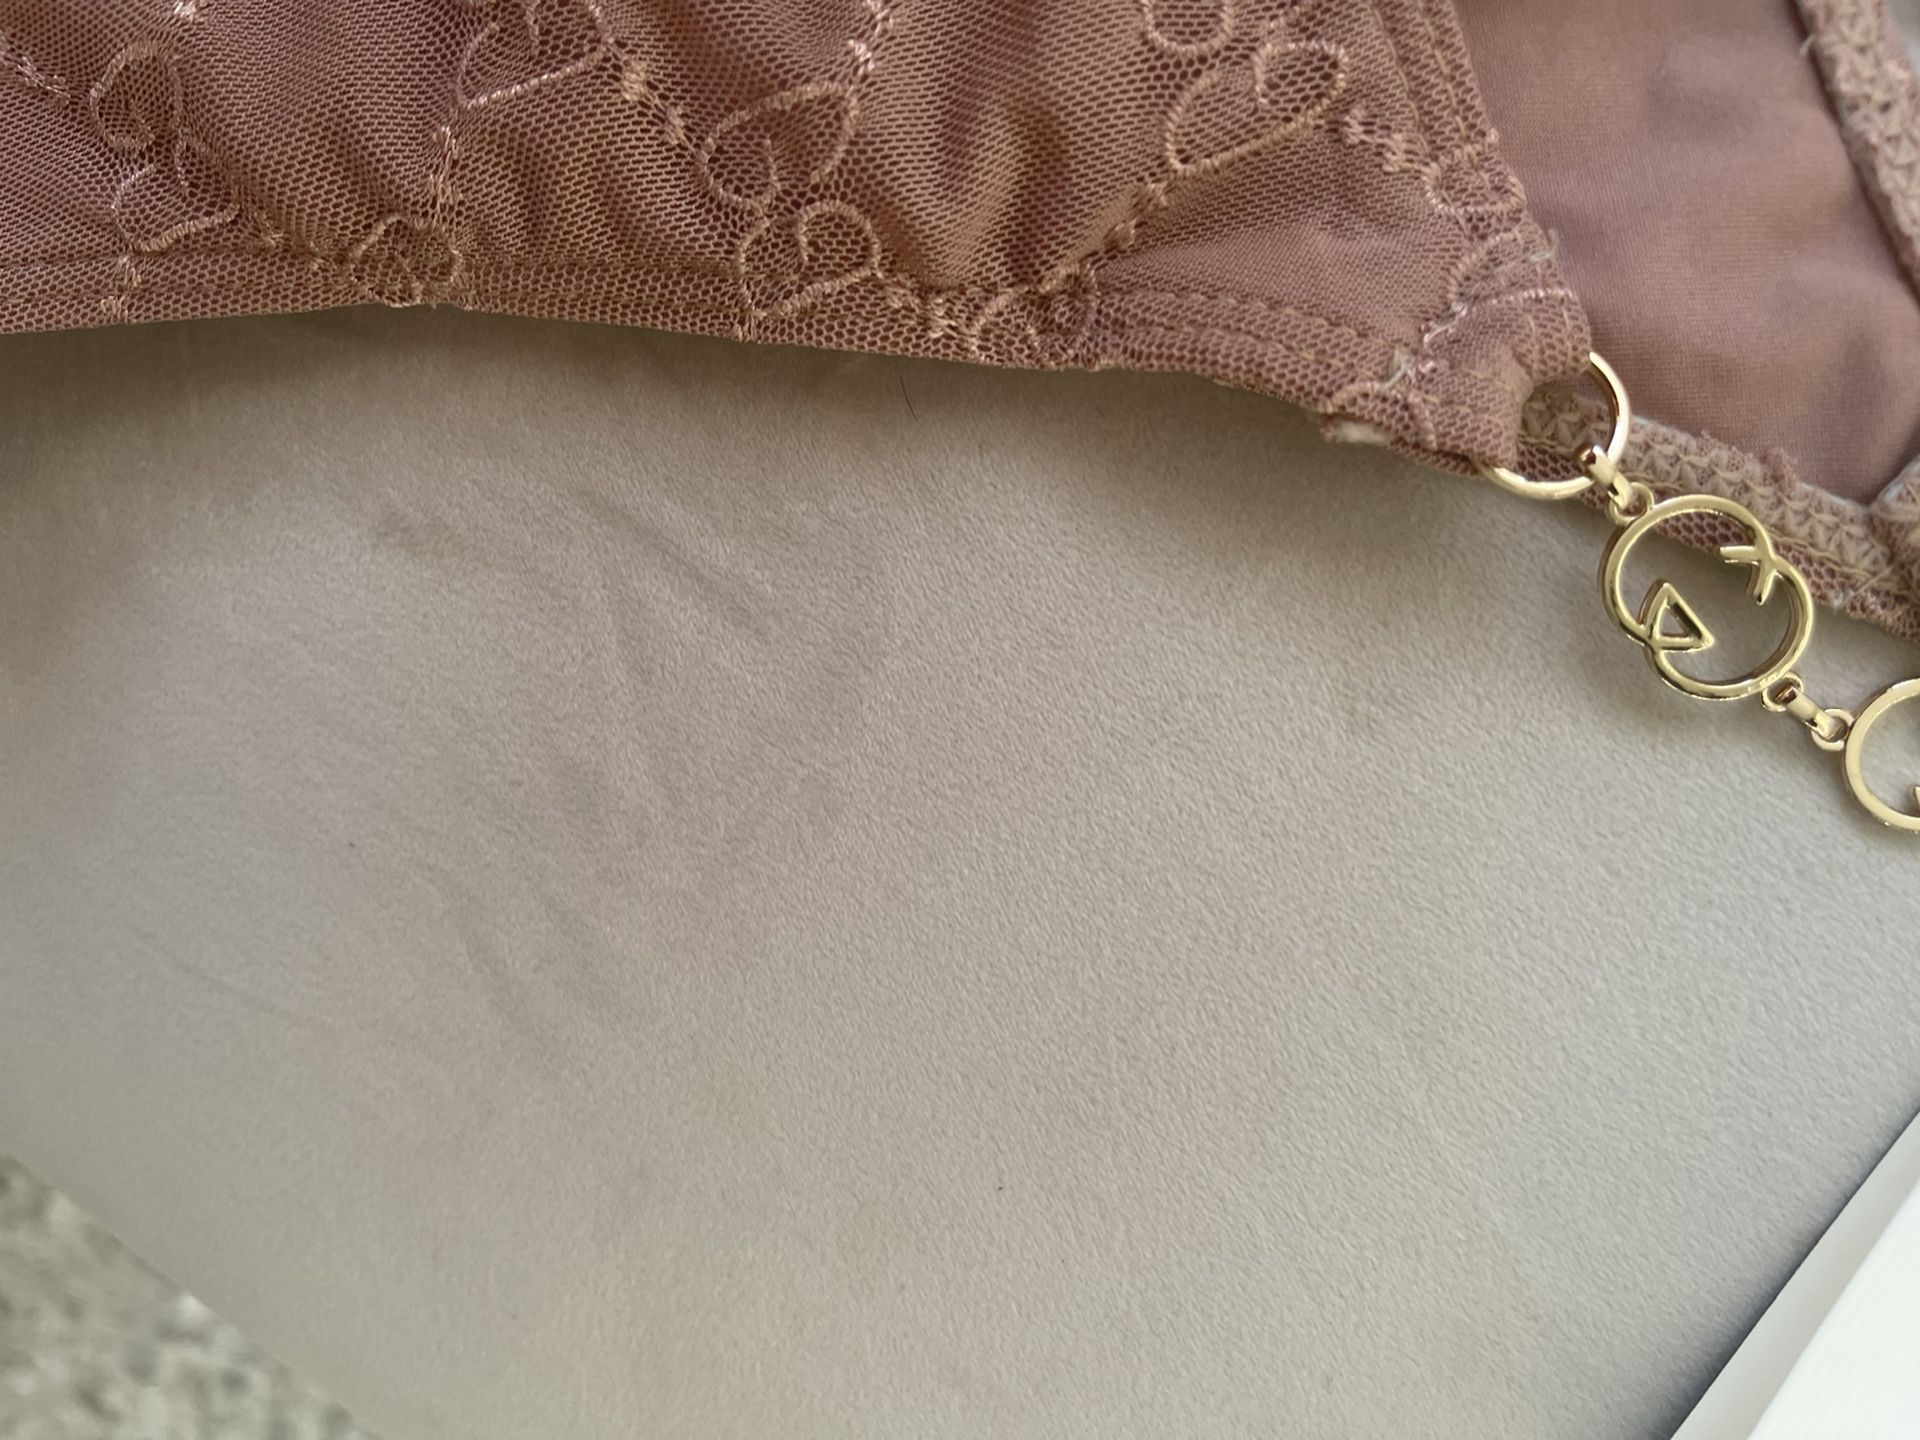 GUCCI BATHING SUIT (Medium Only) for Sale in Fontana, CA - OfferUp